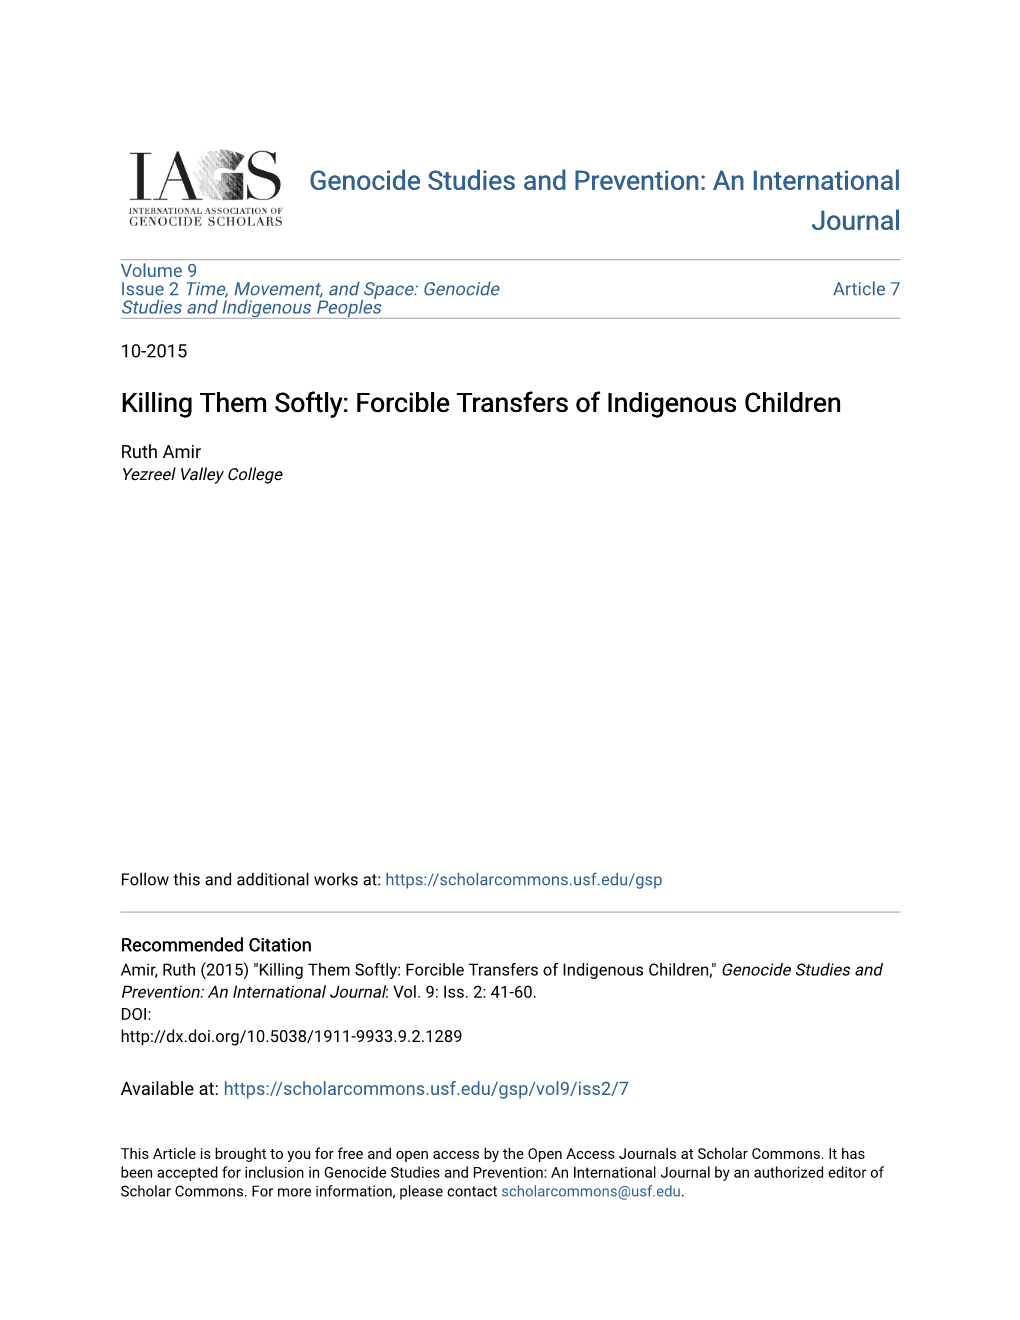 Killing Them Softly: Forcible Transfers of Indigenous Children